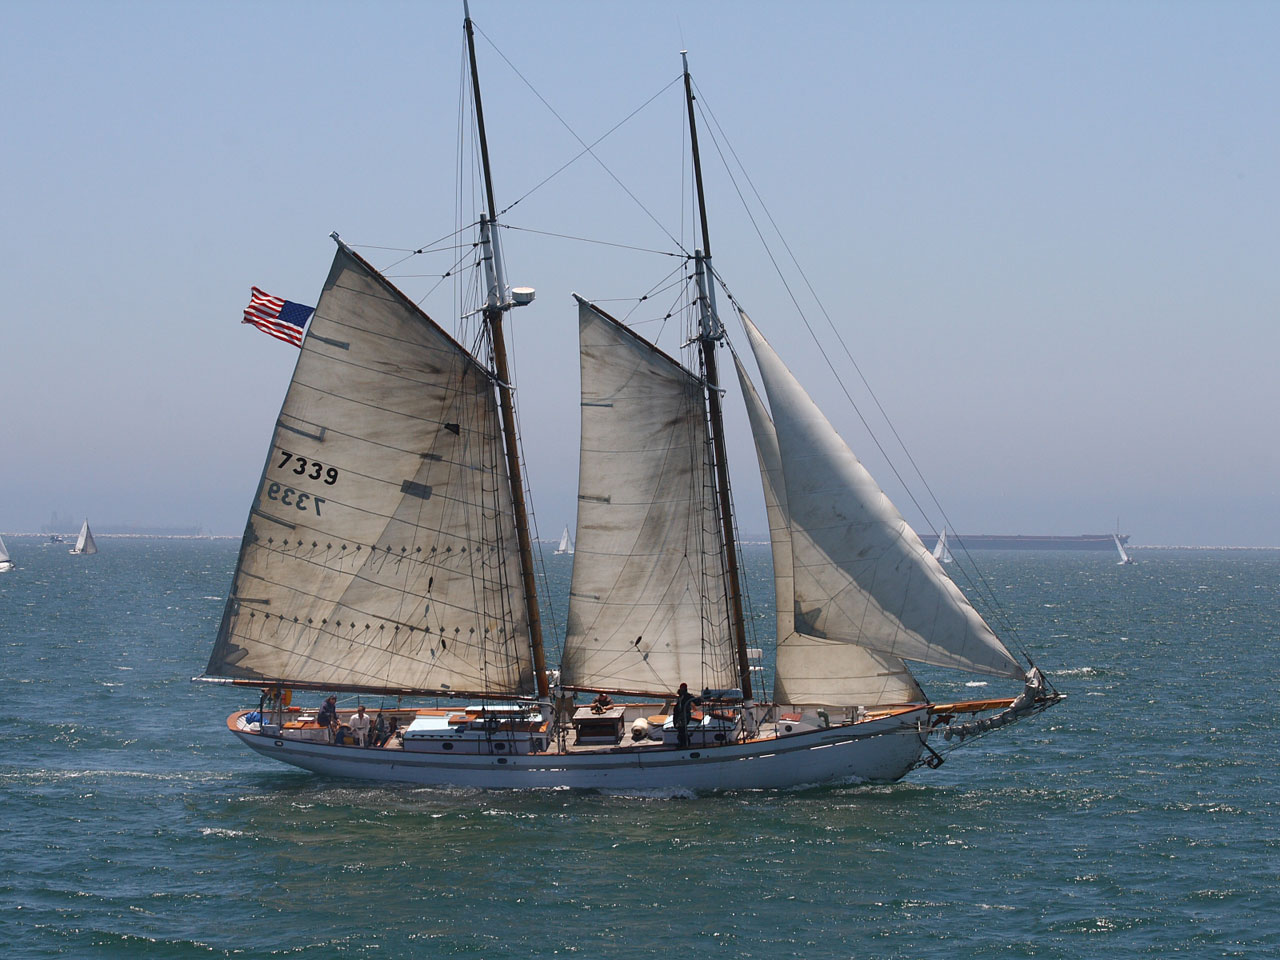 A two-masted schooner races by Belmont Shores Pier in Long Beach, California